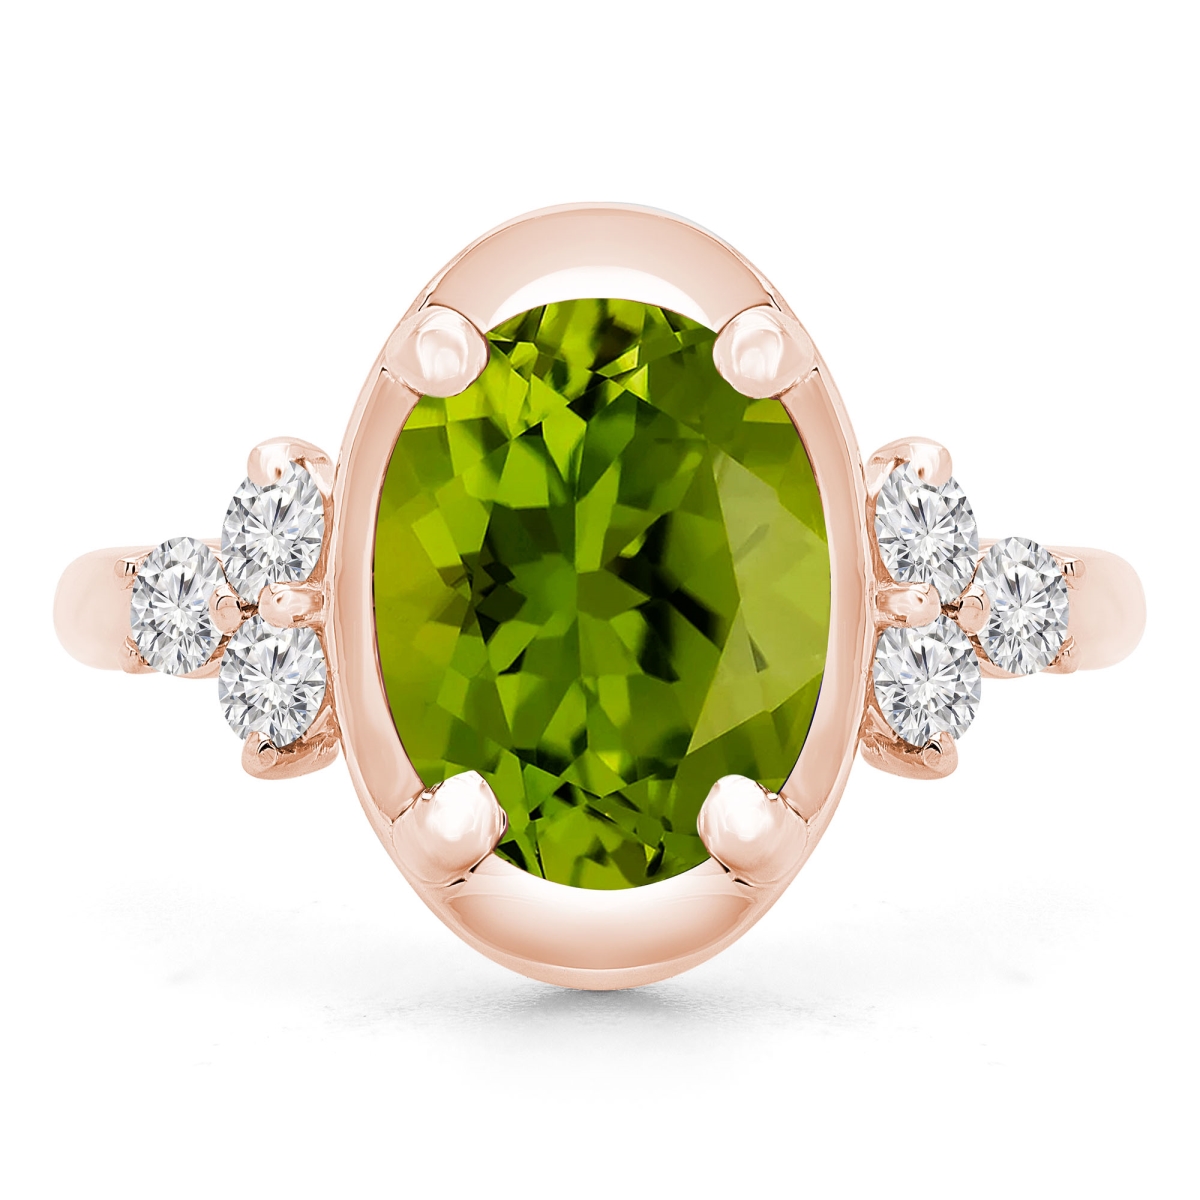 Picture of Majesty Diamonds MD190412-5.75 3.9 CTW Oval Green Peridot Cocktail Ring in 14K Rose Gold - Size 5.75